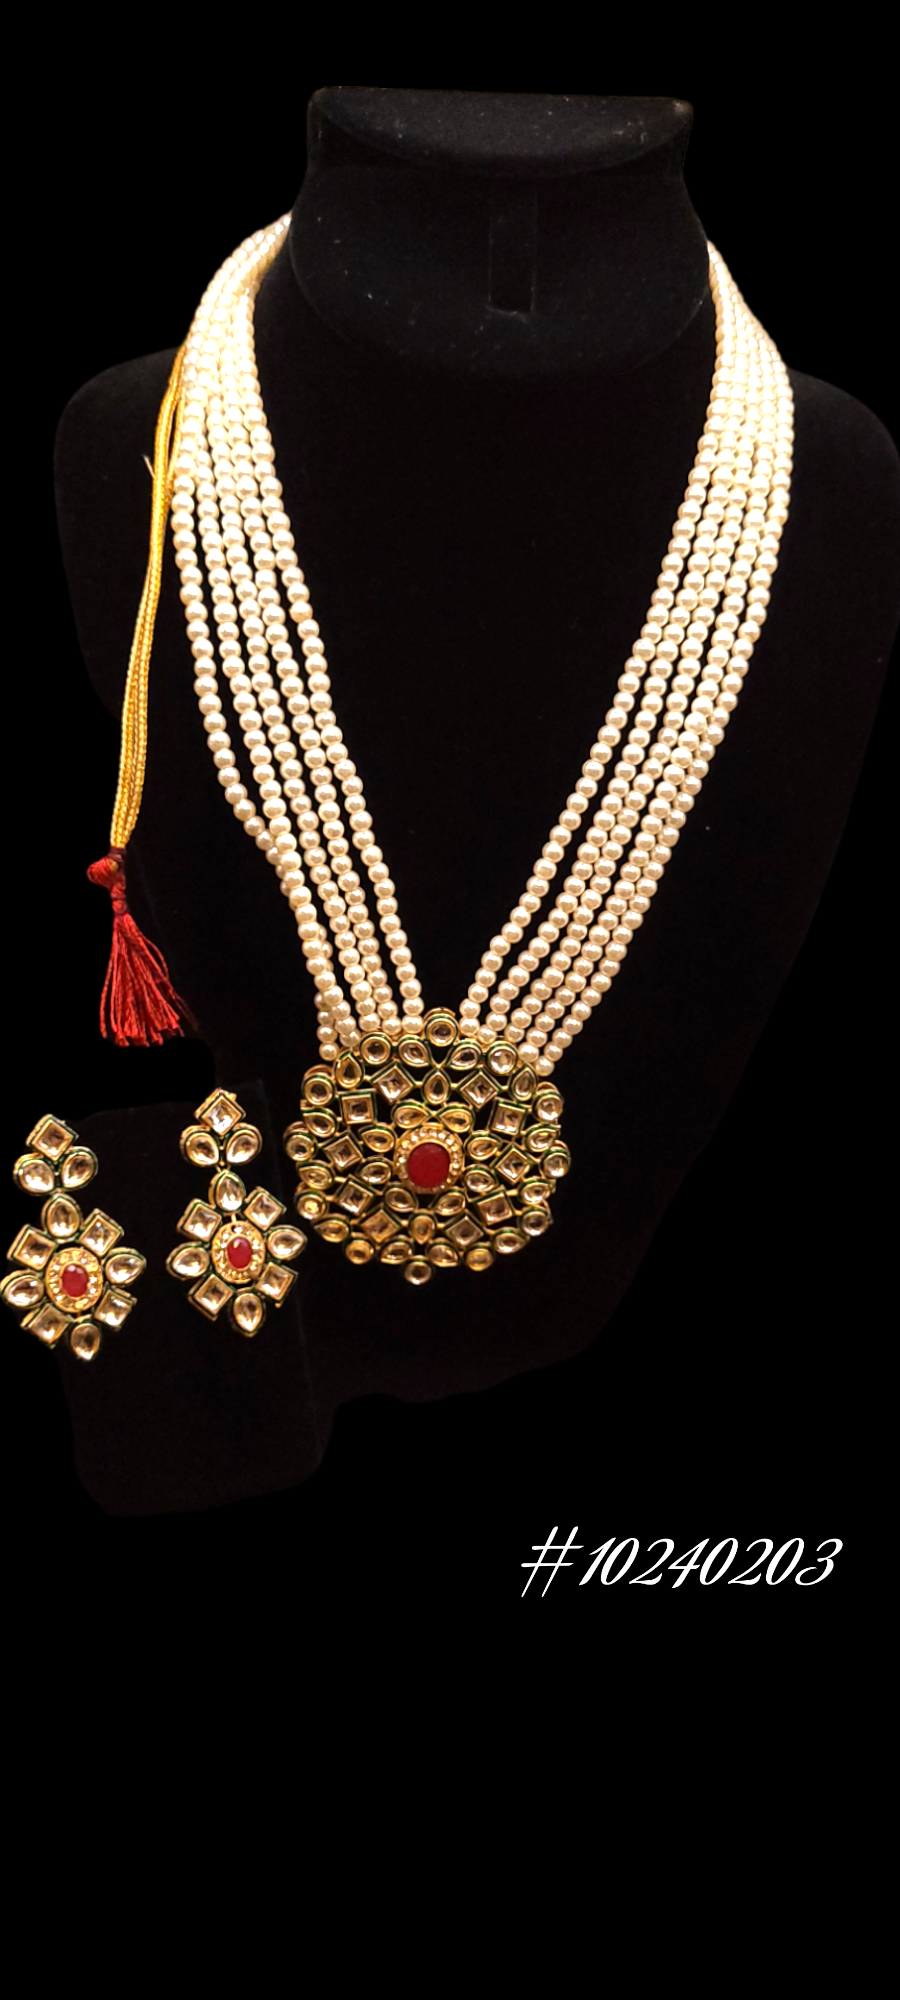 Beaded necklace set with kundan pendant and earrings